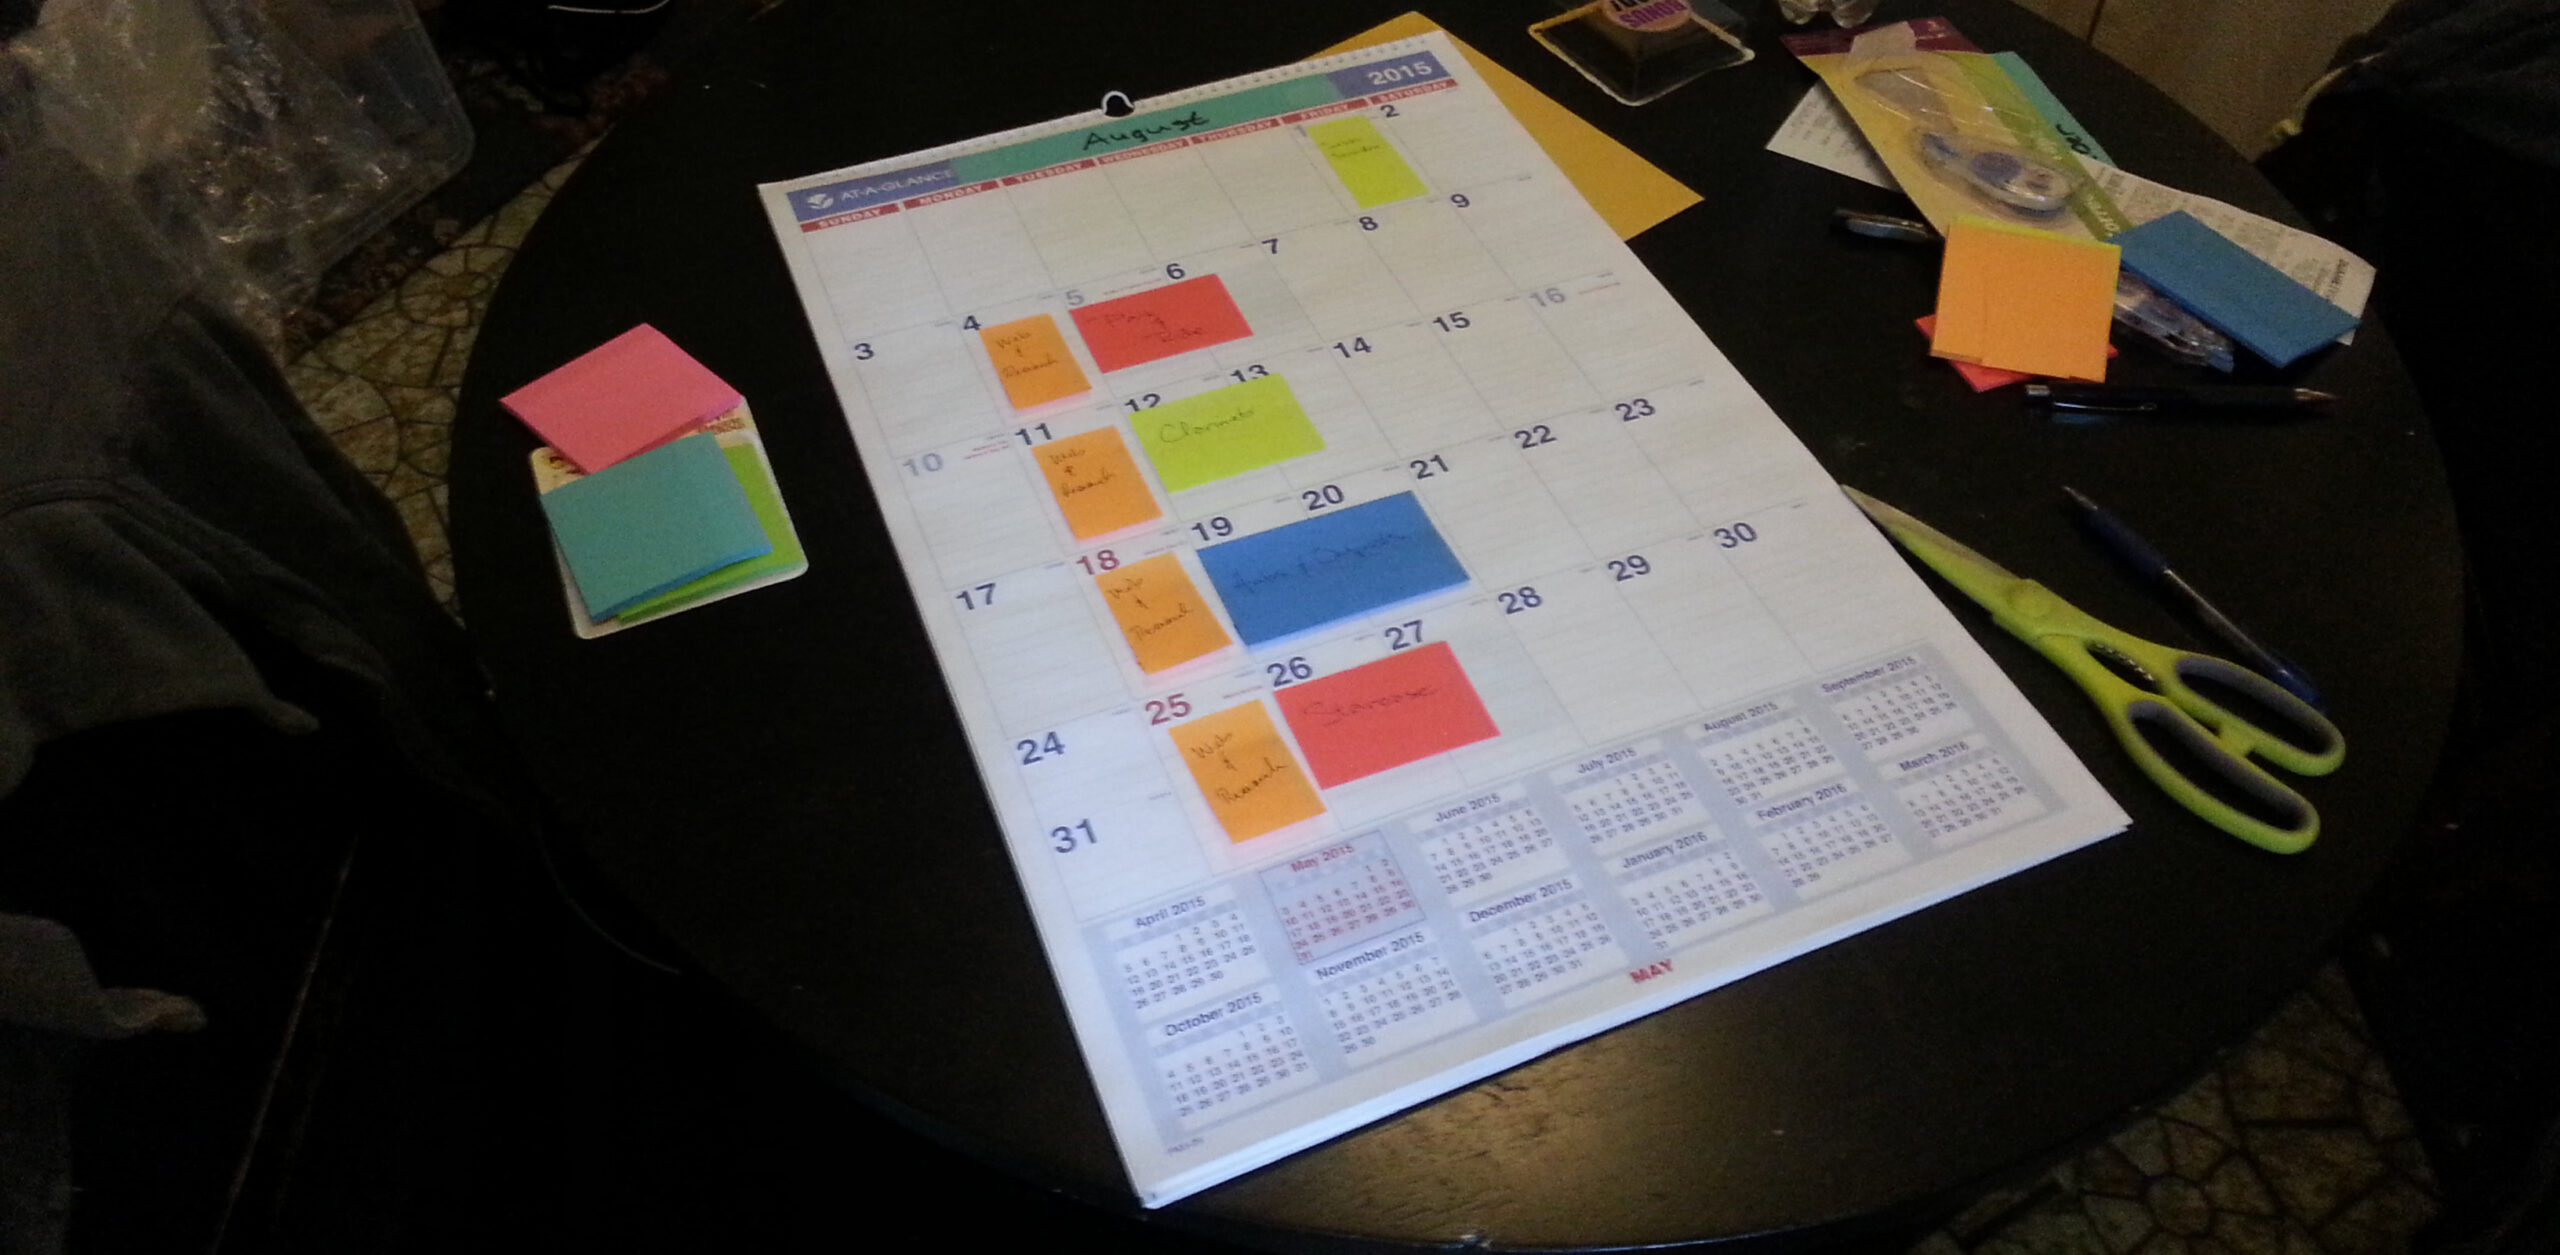 Tobenski's calendar with color coded post-it notes.